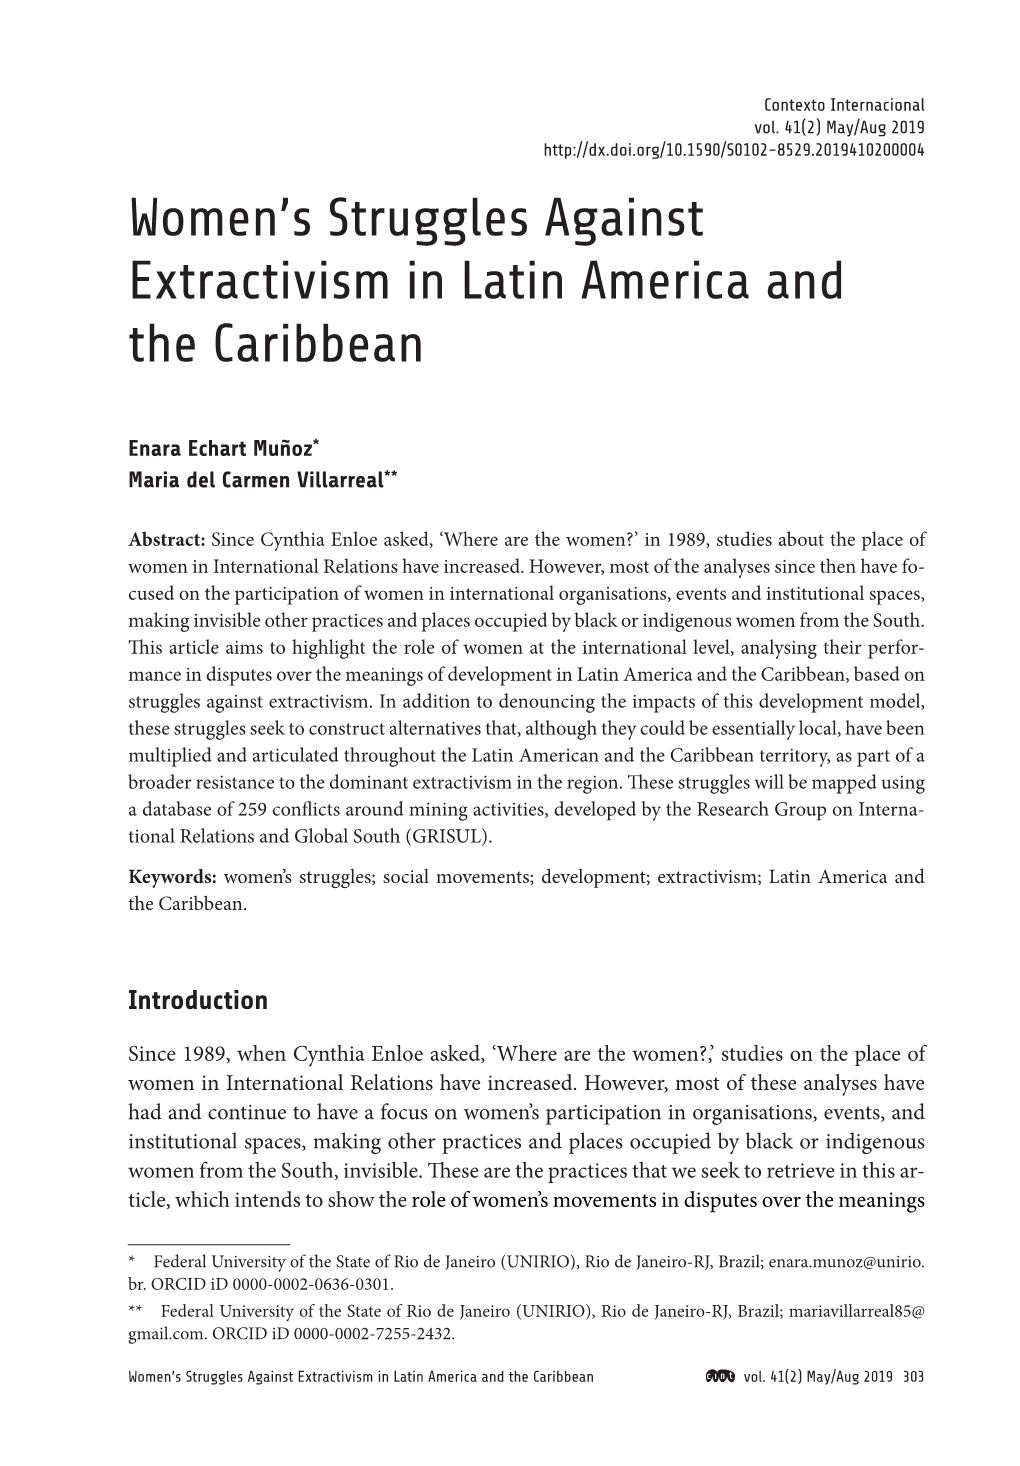 Women's Struggles Against Extractivism in Latin America And